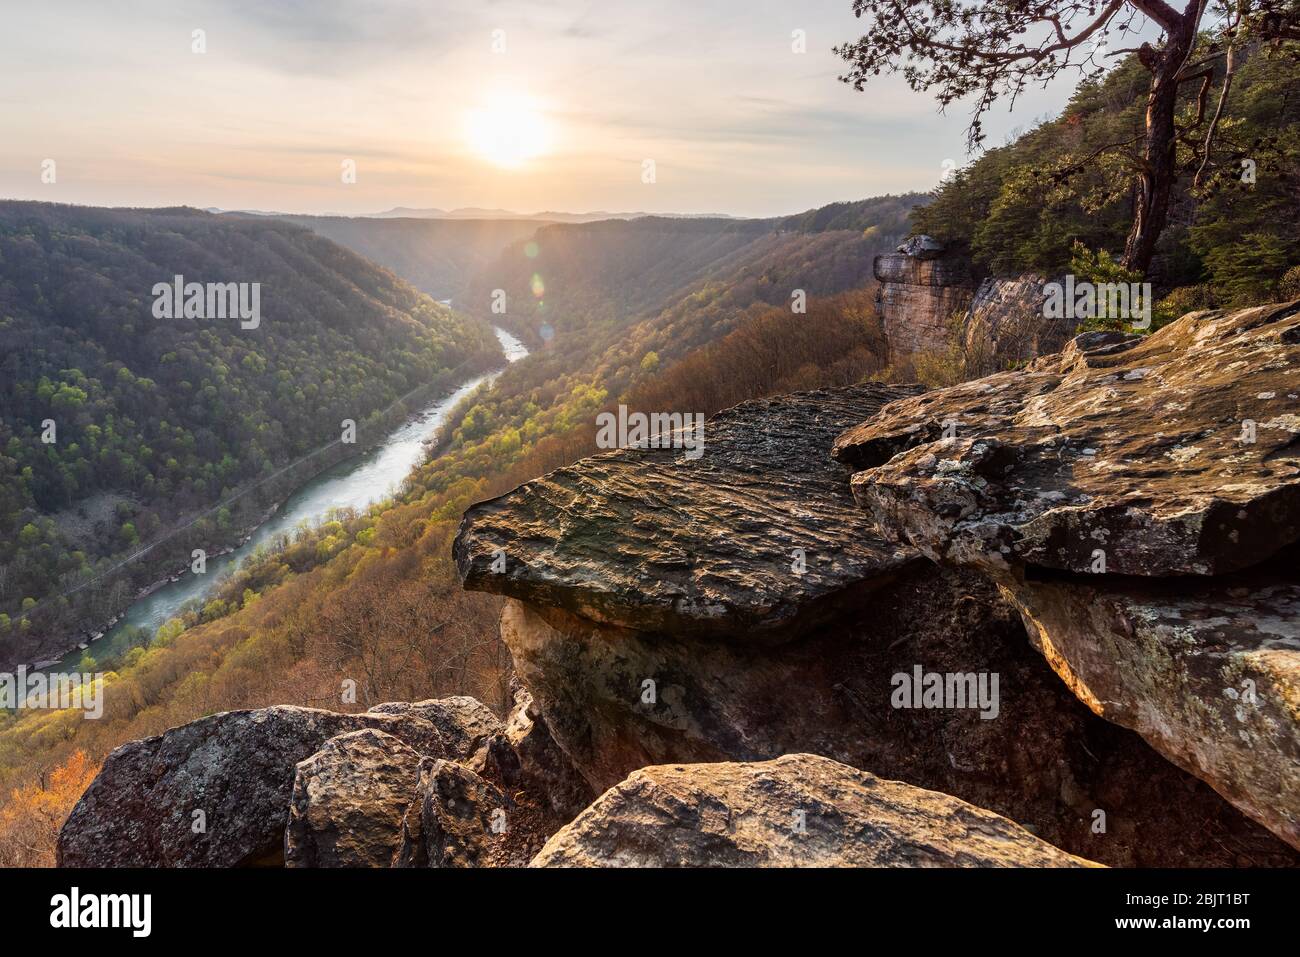 The sunsets on Beauty Mountain along the rocky clifflines of the New River Gorge in West Virginia on an early spring evening. Stock Photo